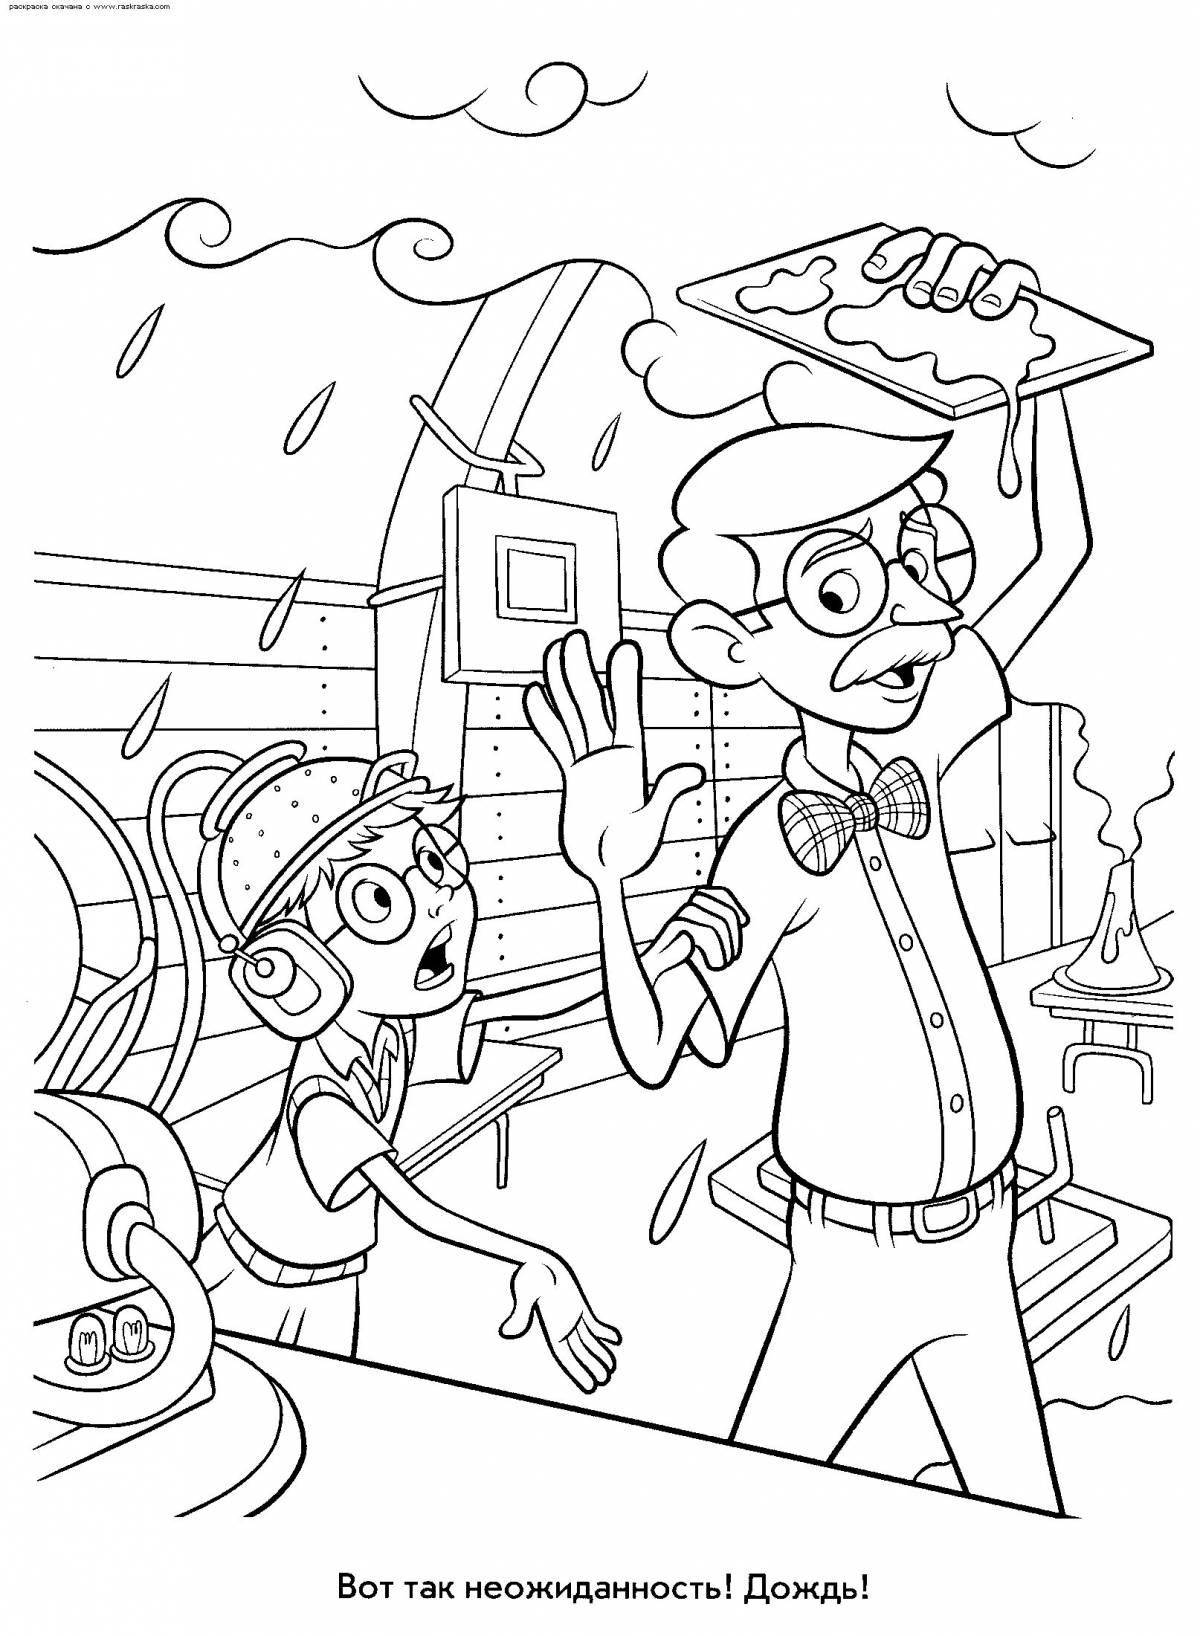 Nick inventor coloring book